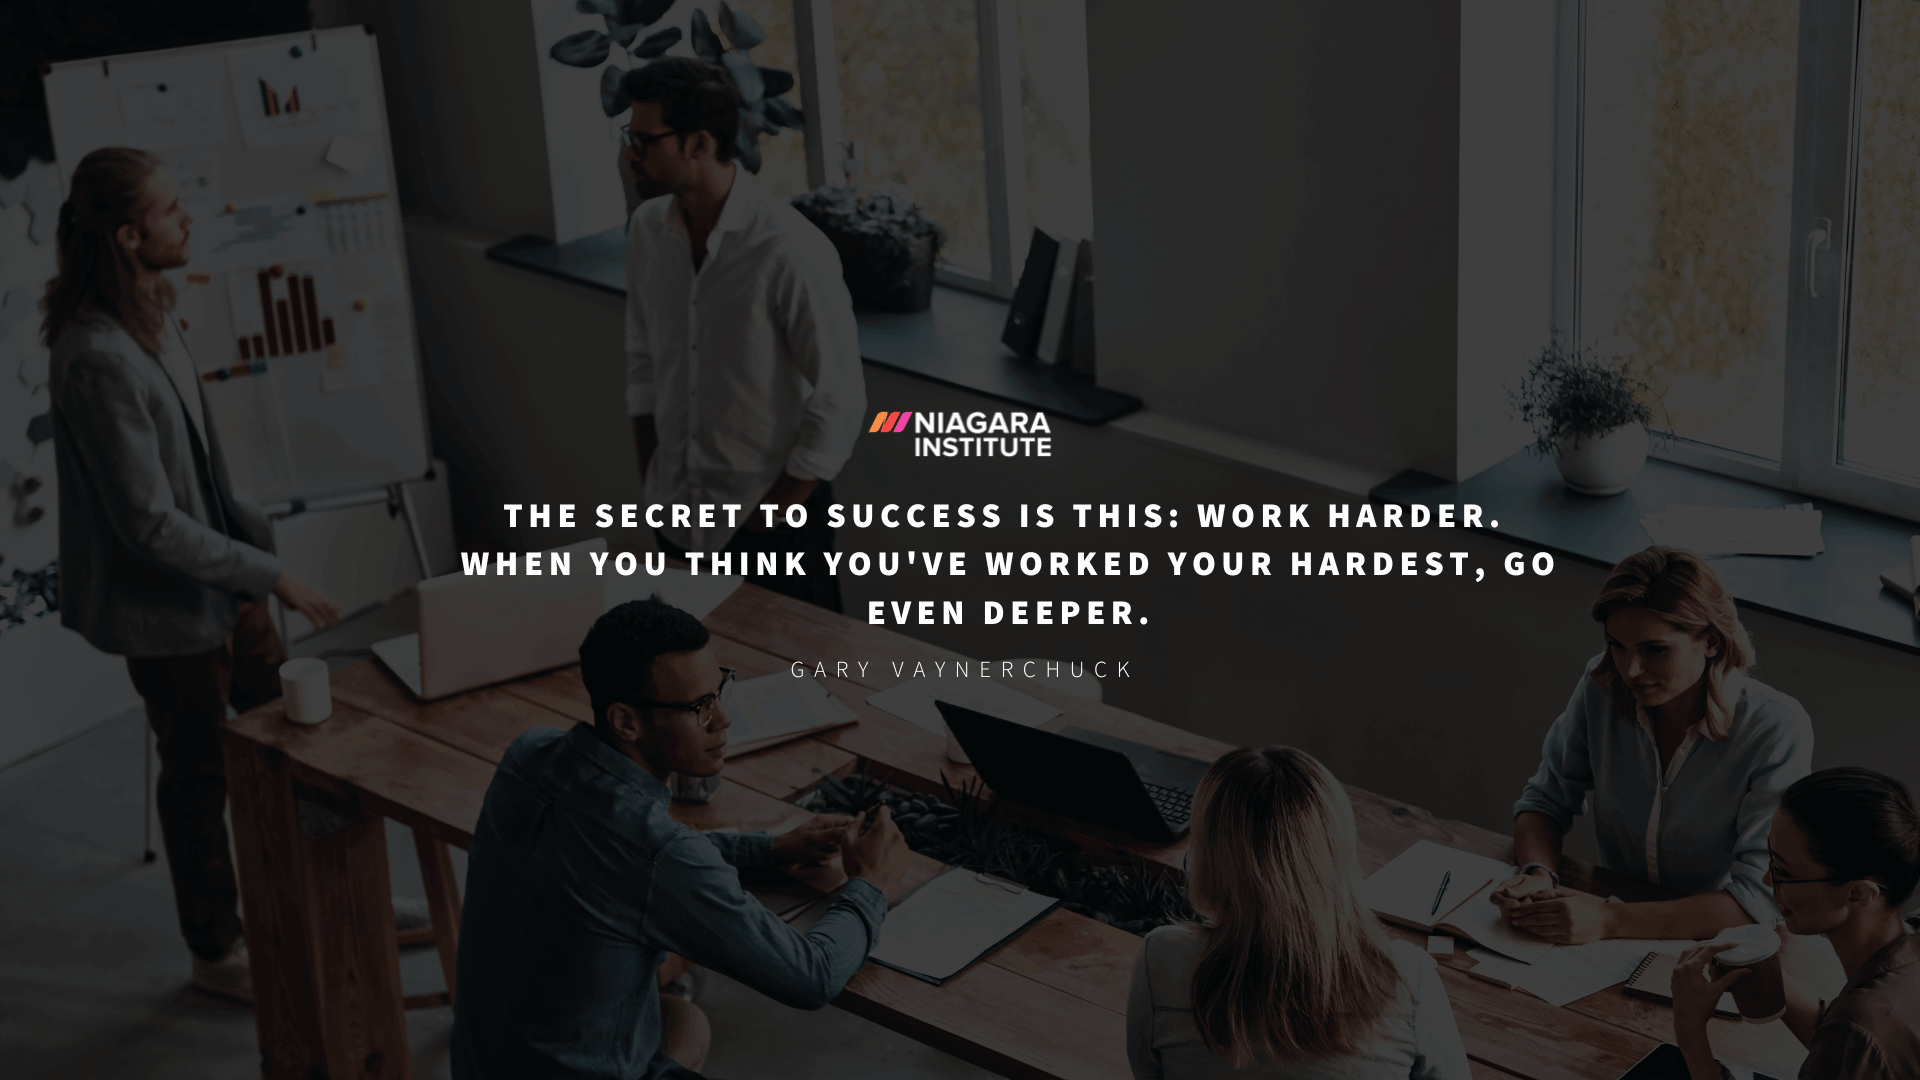 Daily quote about hard work The secret to success is this work harder Gary Vaynerchuck